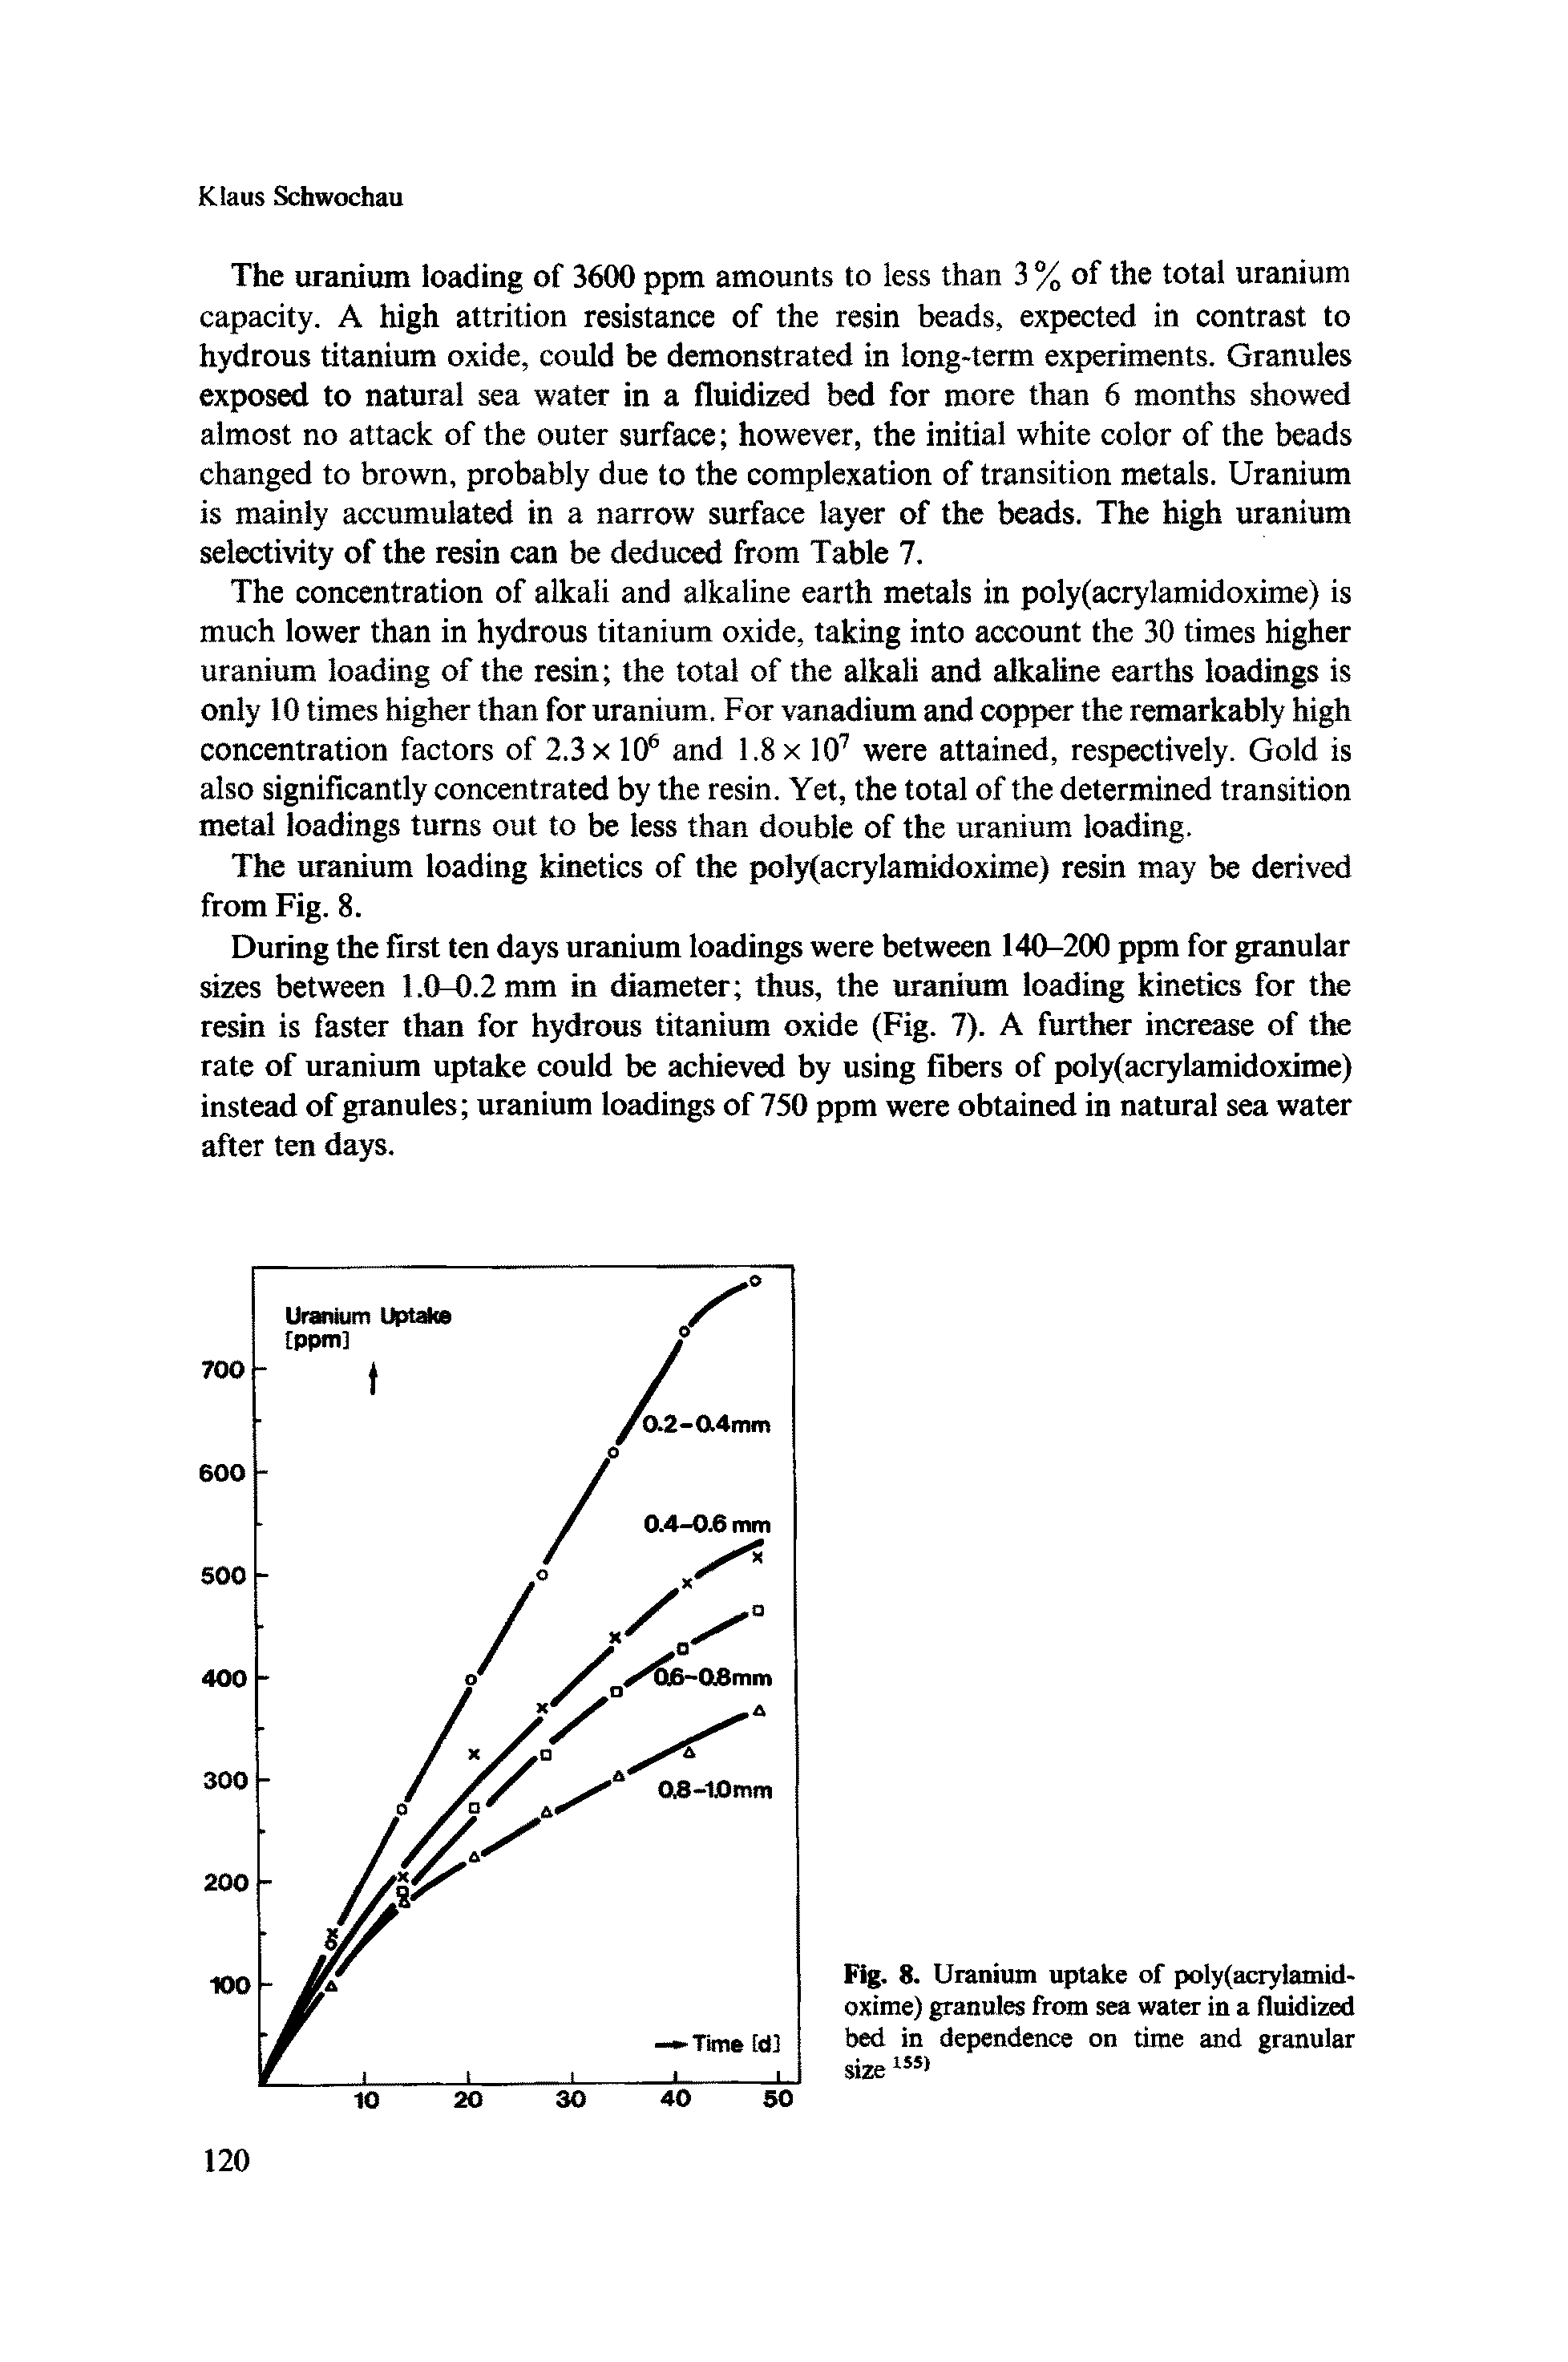 Fig. 8. Uranium uptake of poly(acrylamid-oxime) granules from sea water in a fluidized bed in dependence on time and granular size155 ...